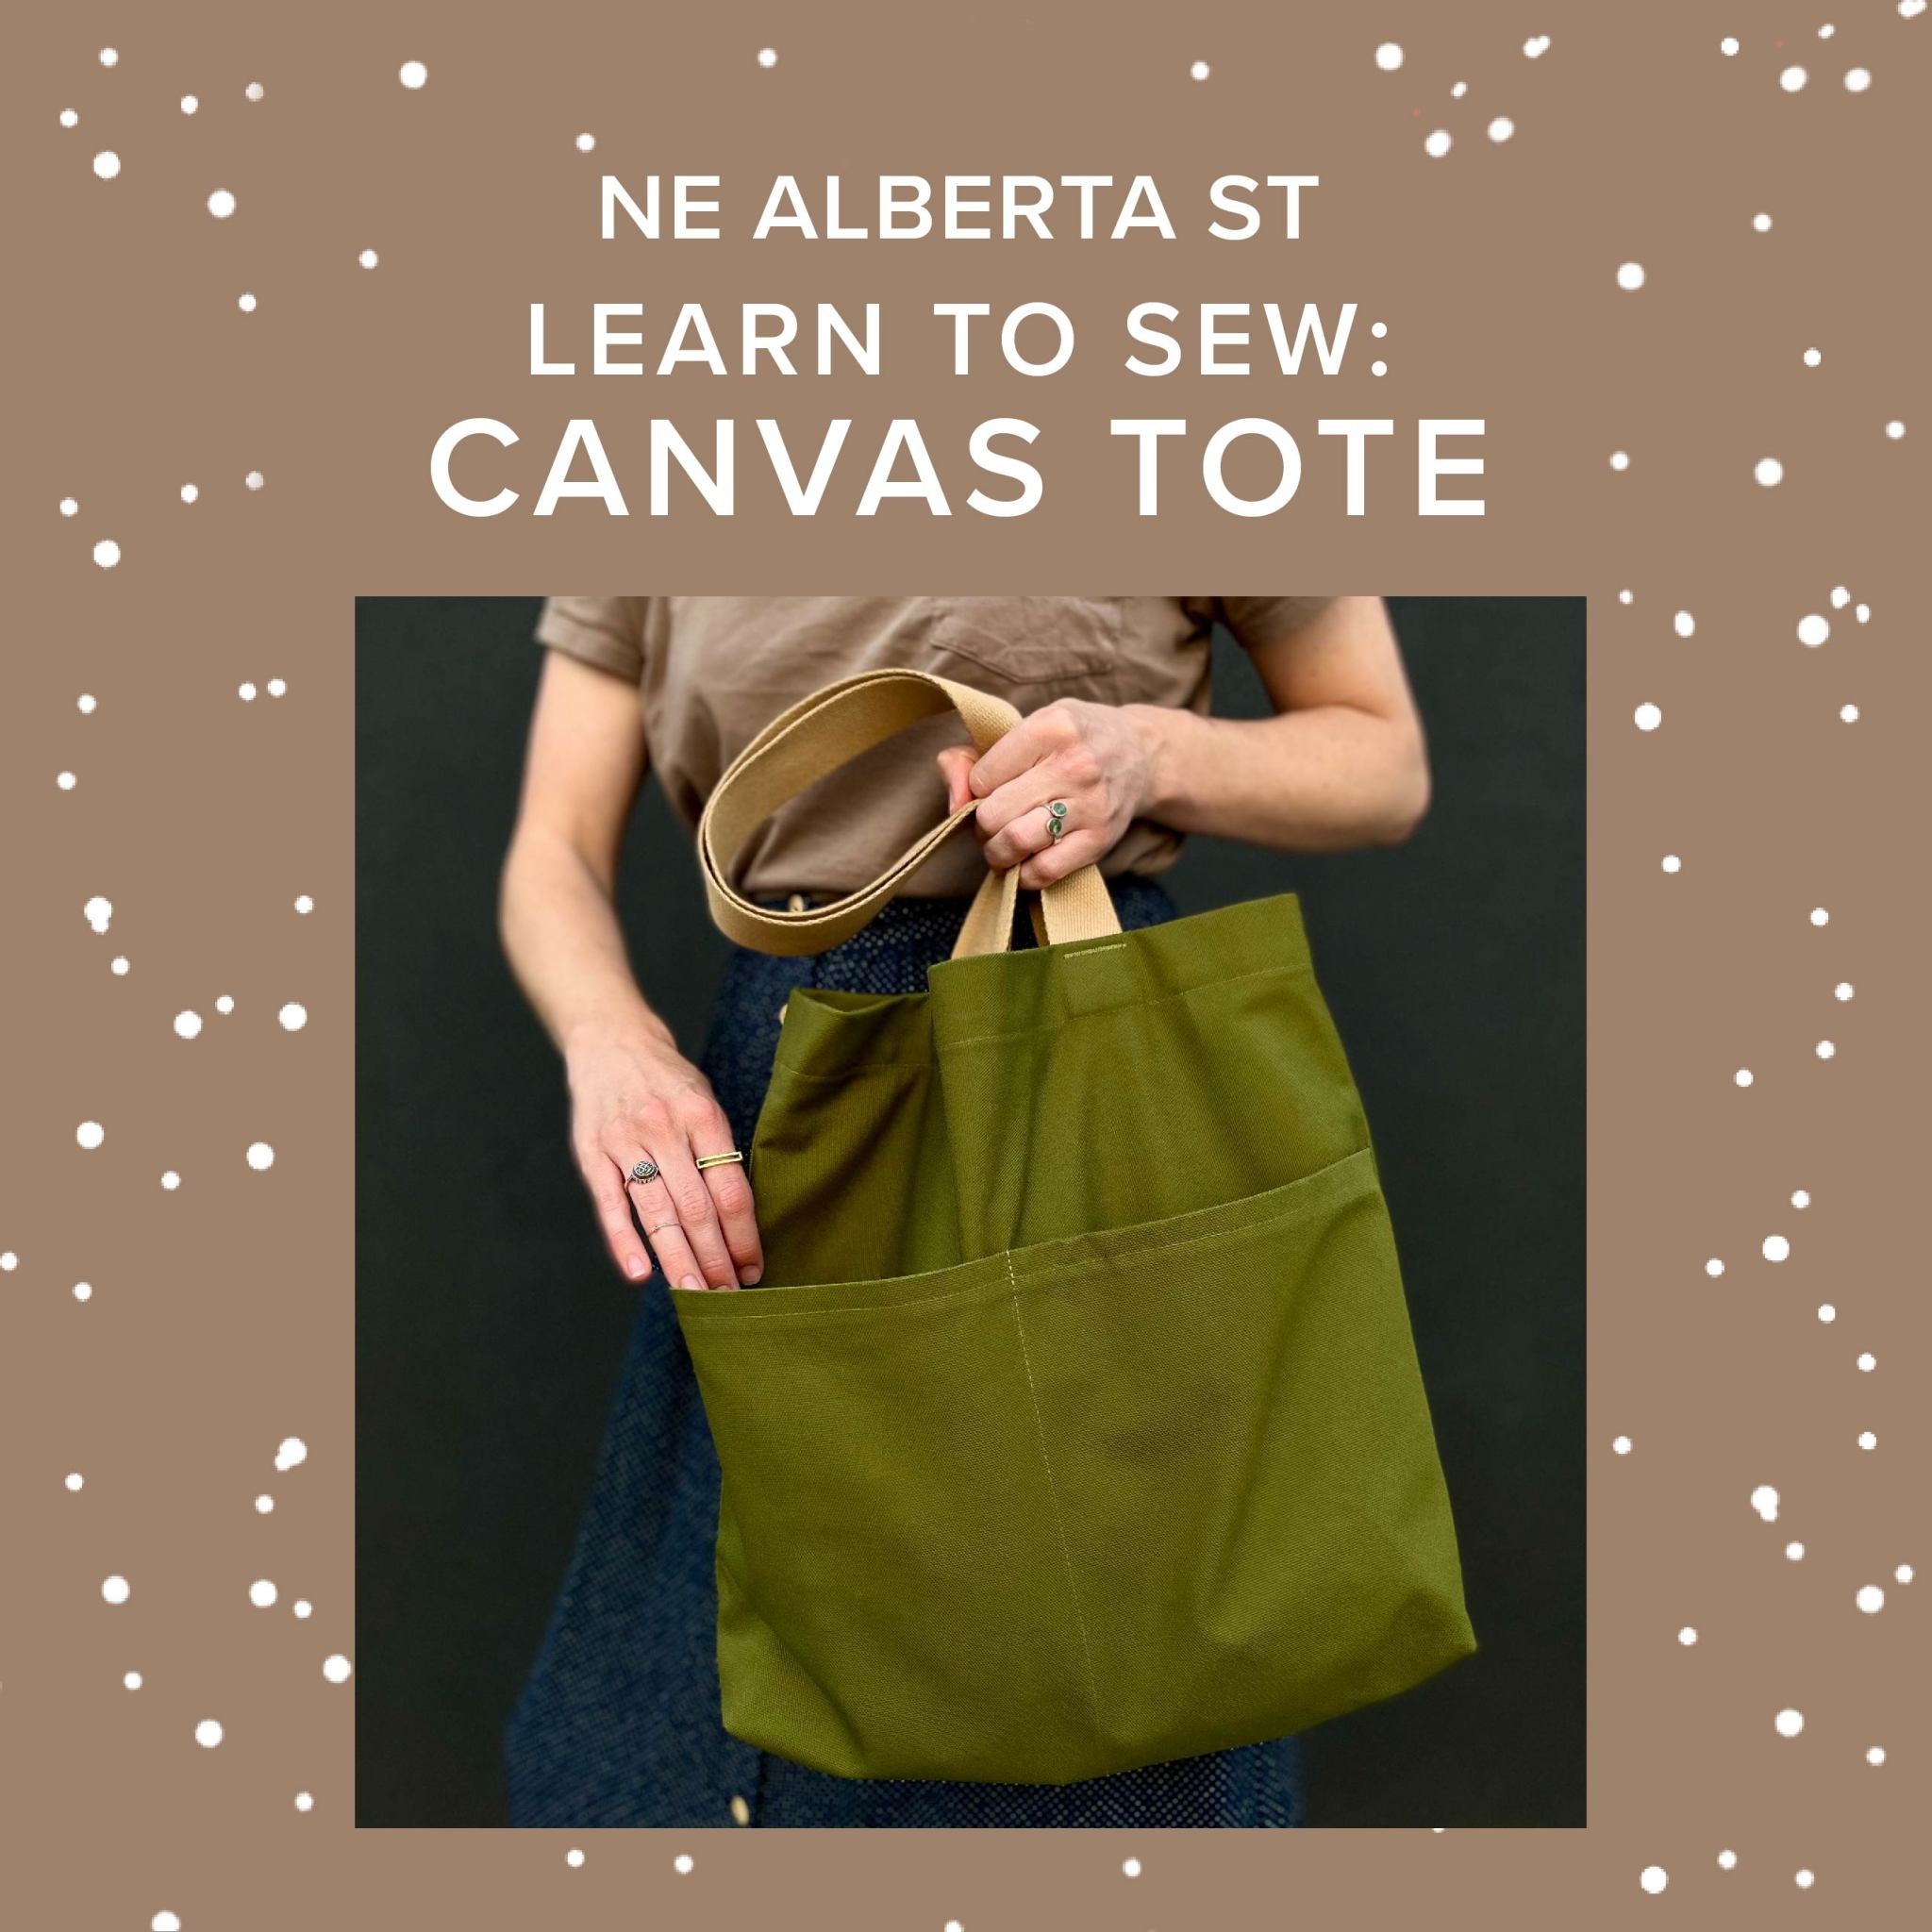 Rachel Halse CLASS FULL! Learn to Sew: Canvas Tote, Thursday, February 29th, 4pm-7pm